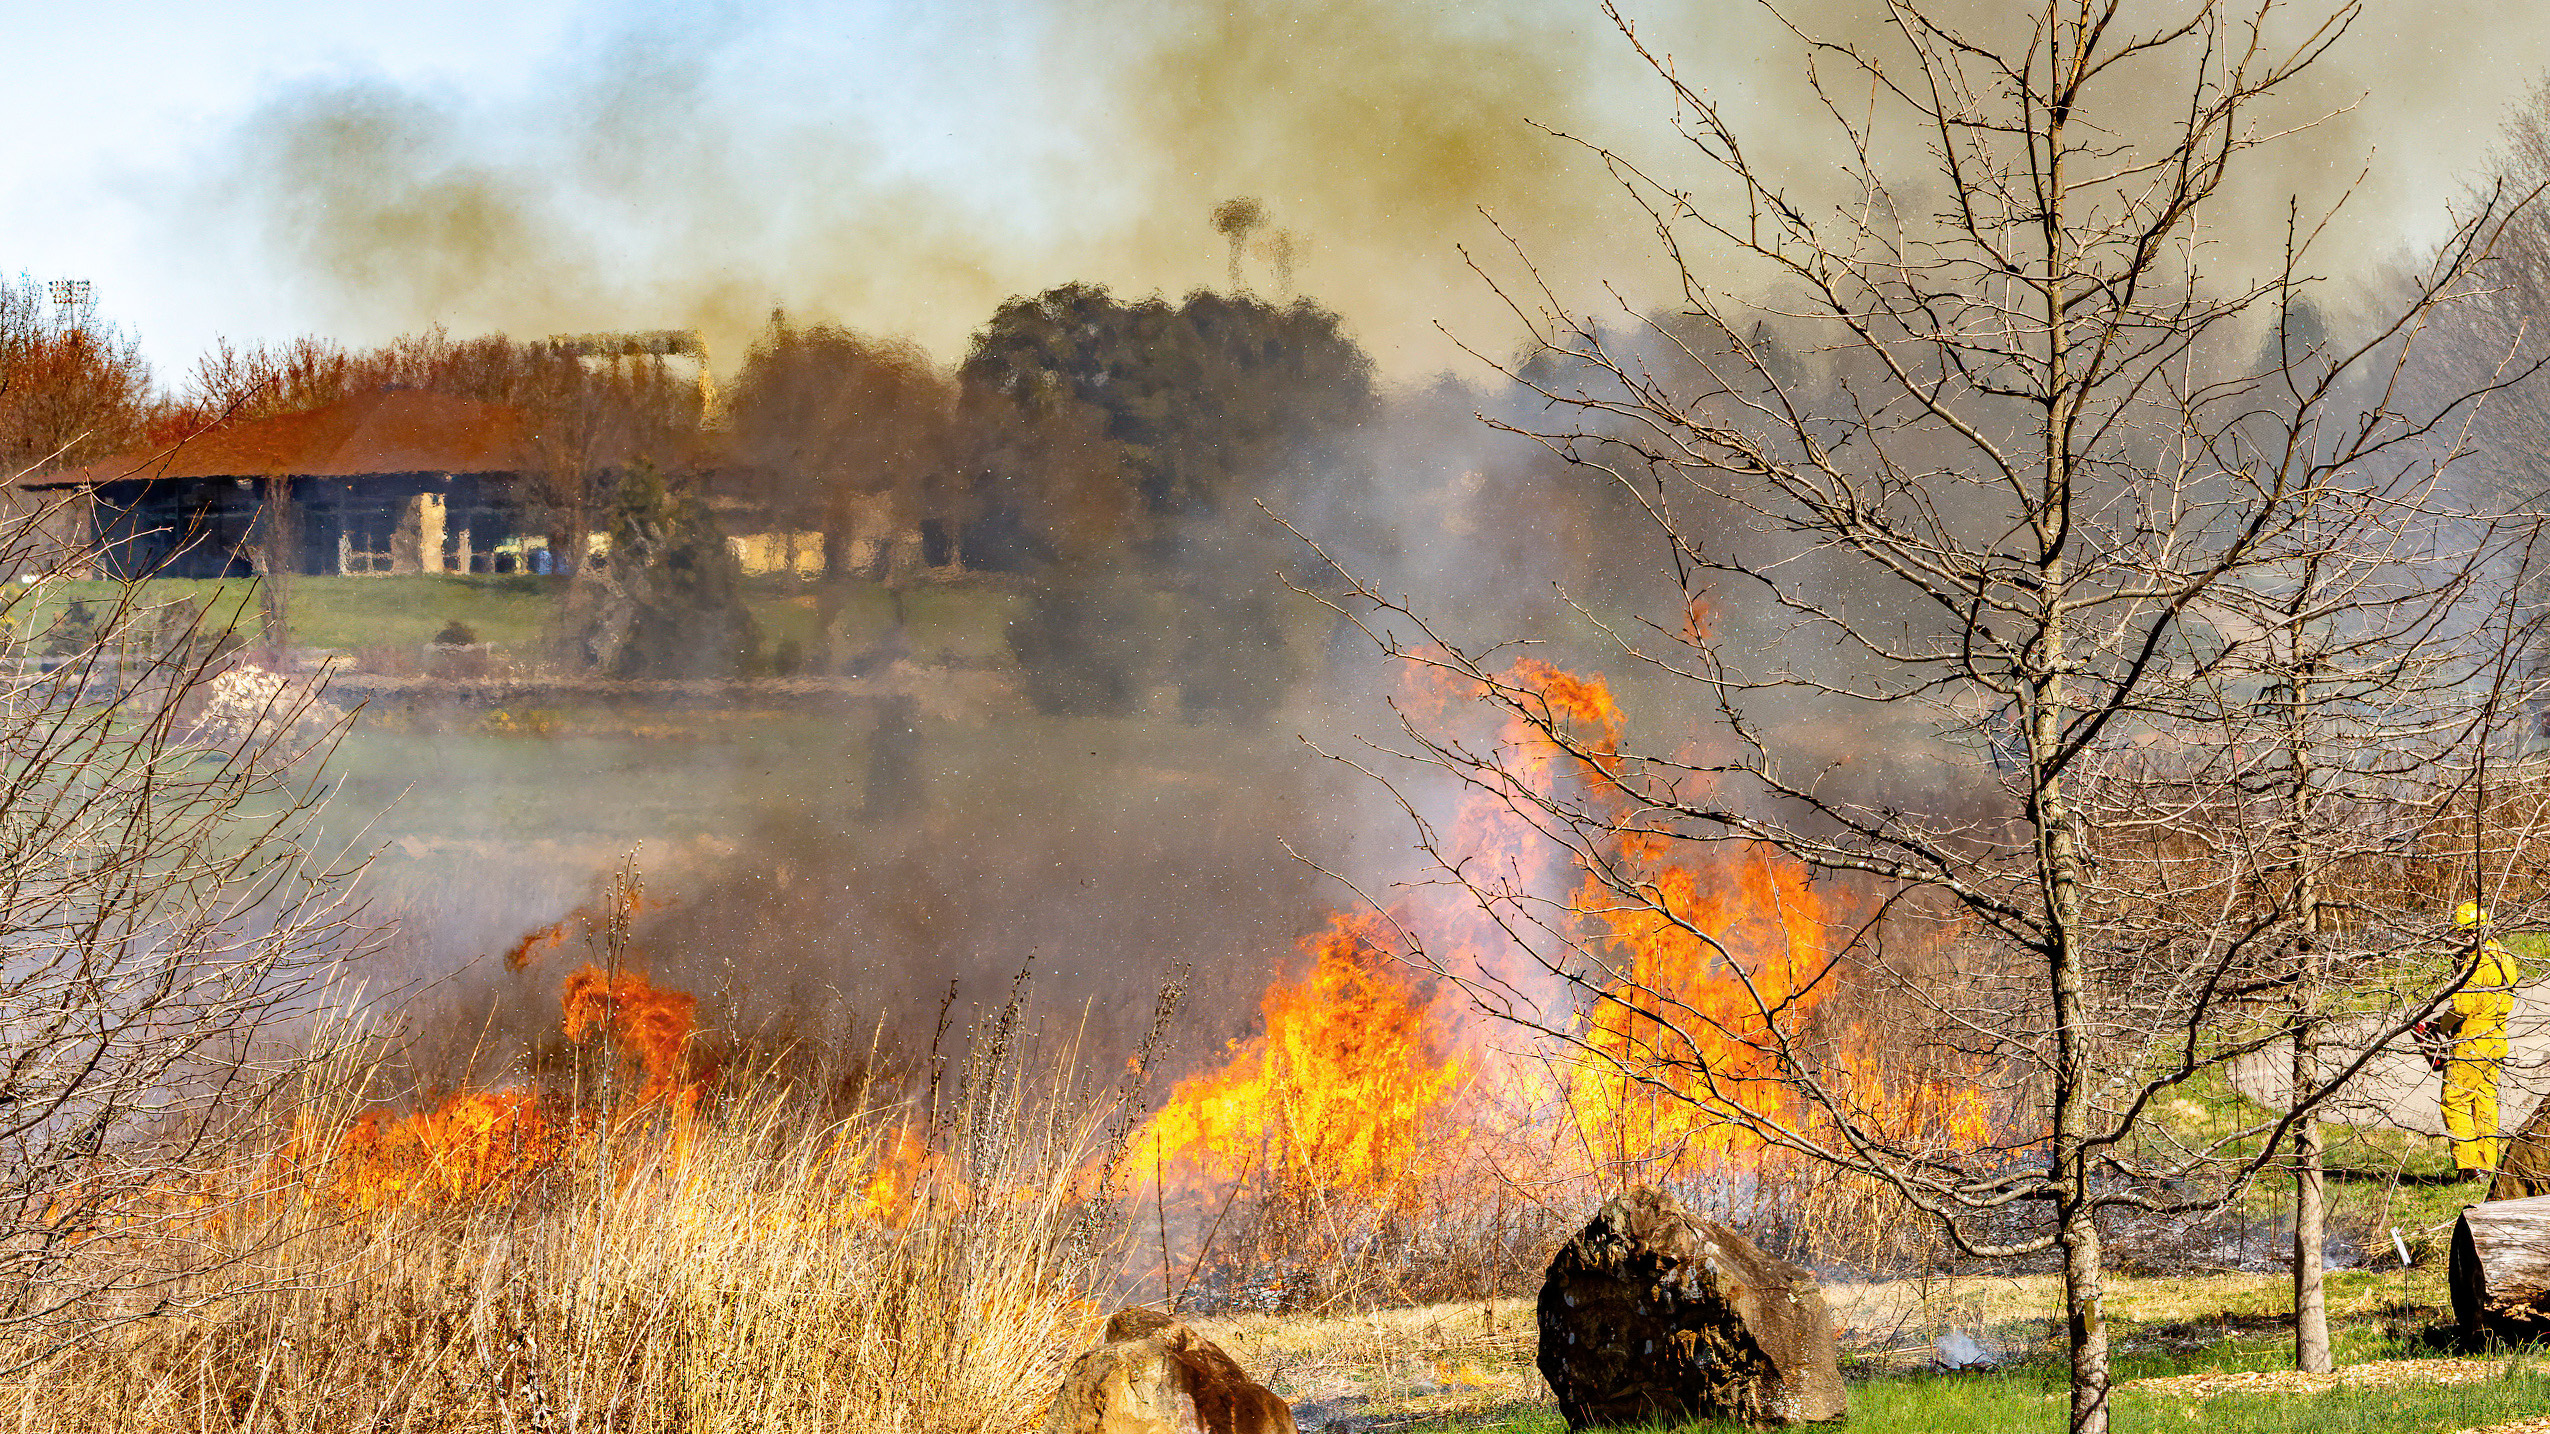 Prescribed fire at The Arboretum. Photo by Ward Ransdell.